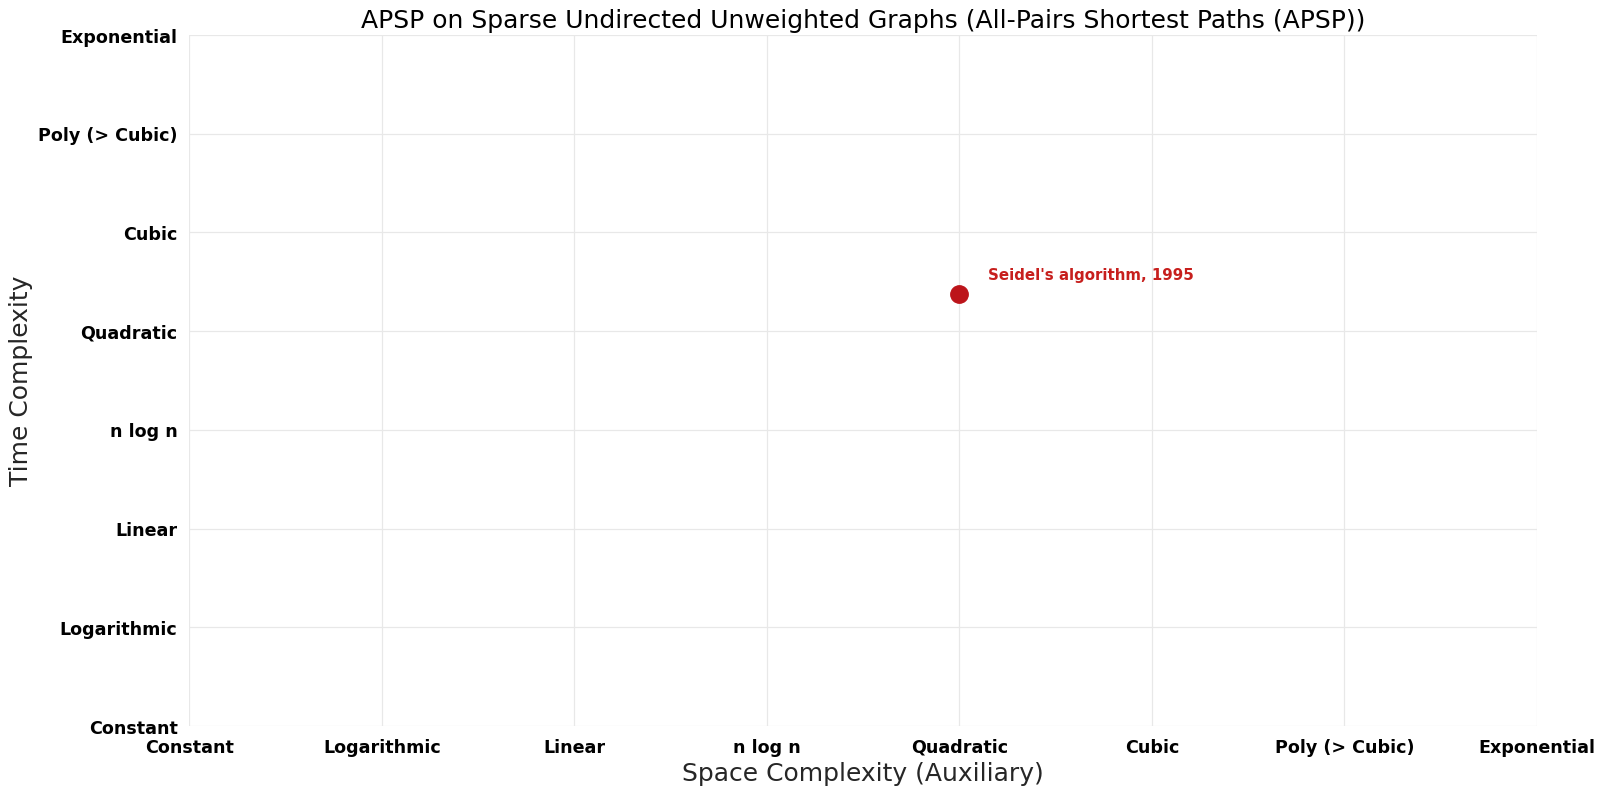 File:All-Pairs Shortest Paths (APSP) - APSP on Sparse Undirected Unweighted Graphs - Pareto Frontier.png